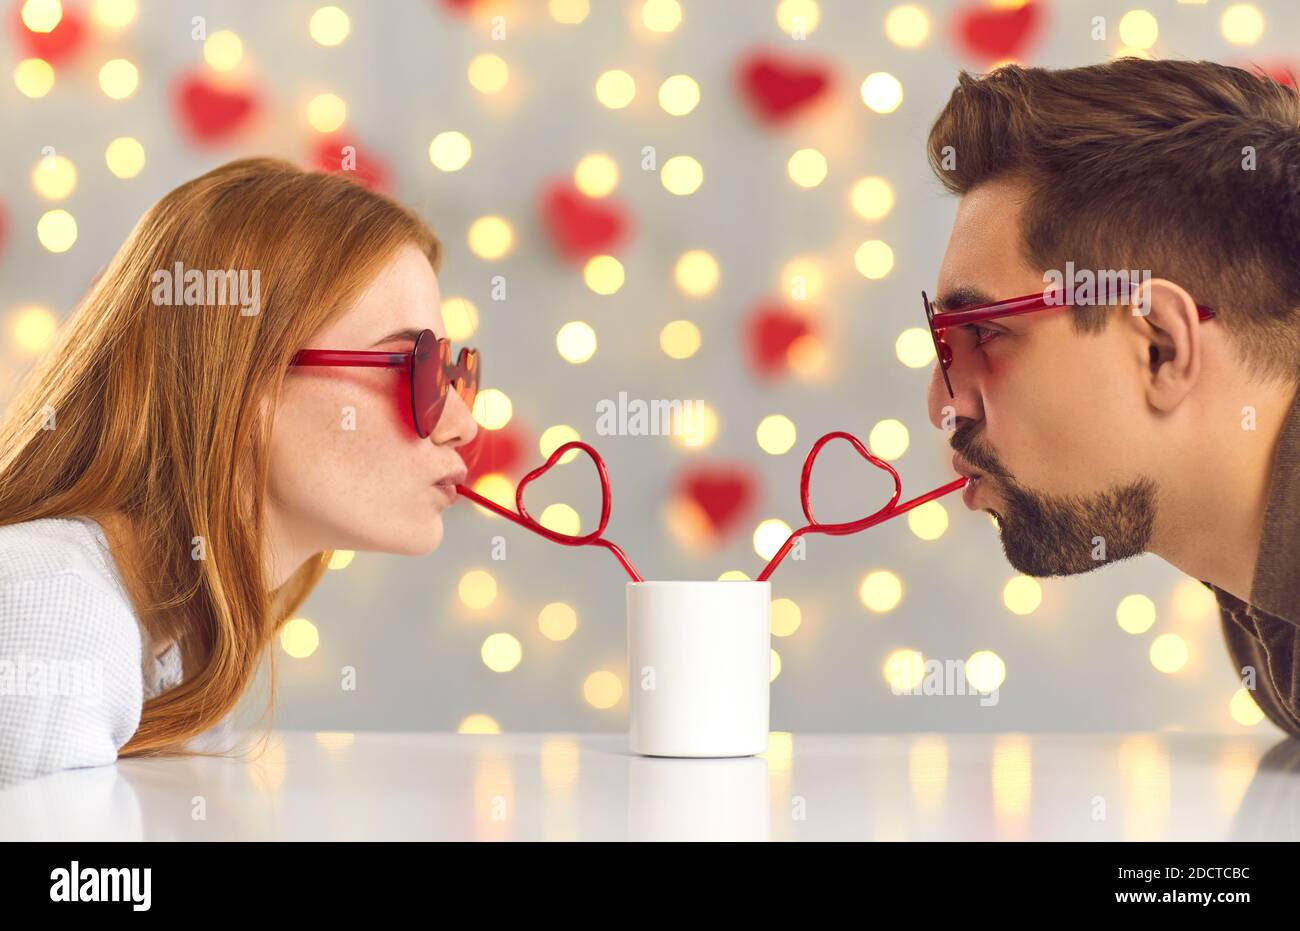 https://c8.alamy.com/comp/2DCTCBC/funny-young-couple-sipping-drink-through-heart-shaped-straws-on-st-valentines-day-date-2DCTCBC.jpg